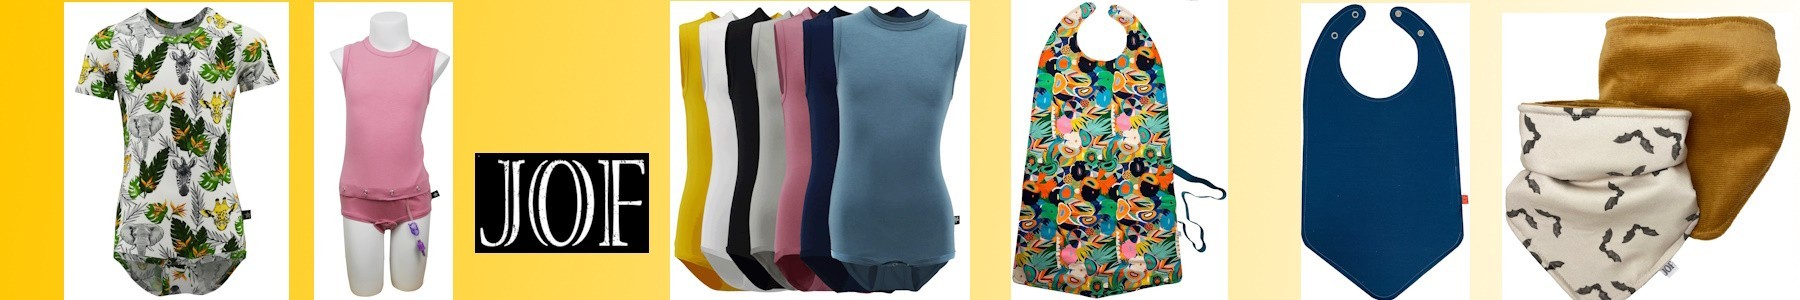 Includes fashion: comfortable bodysuits made of bamboo & more